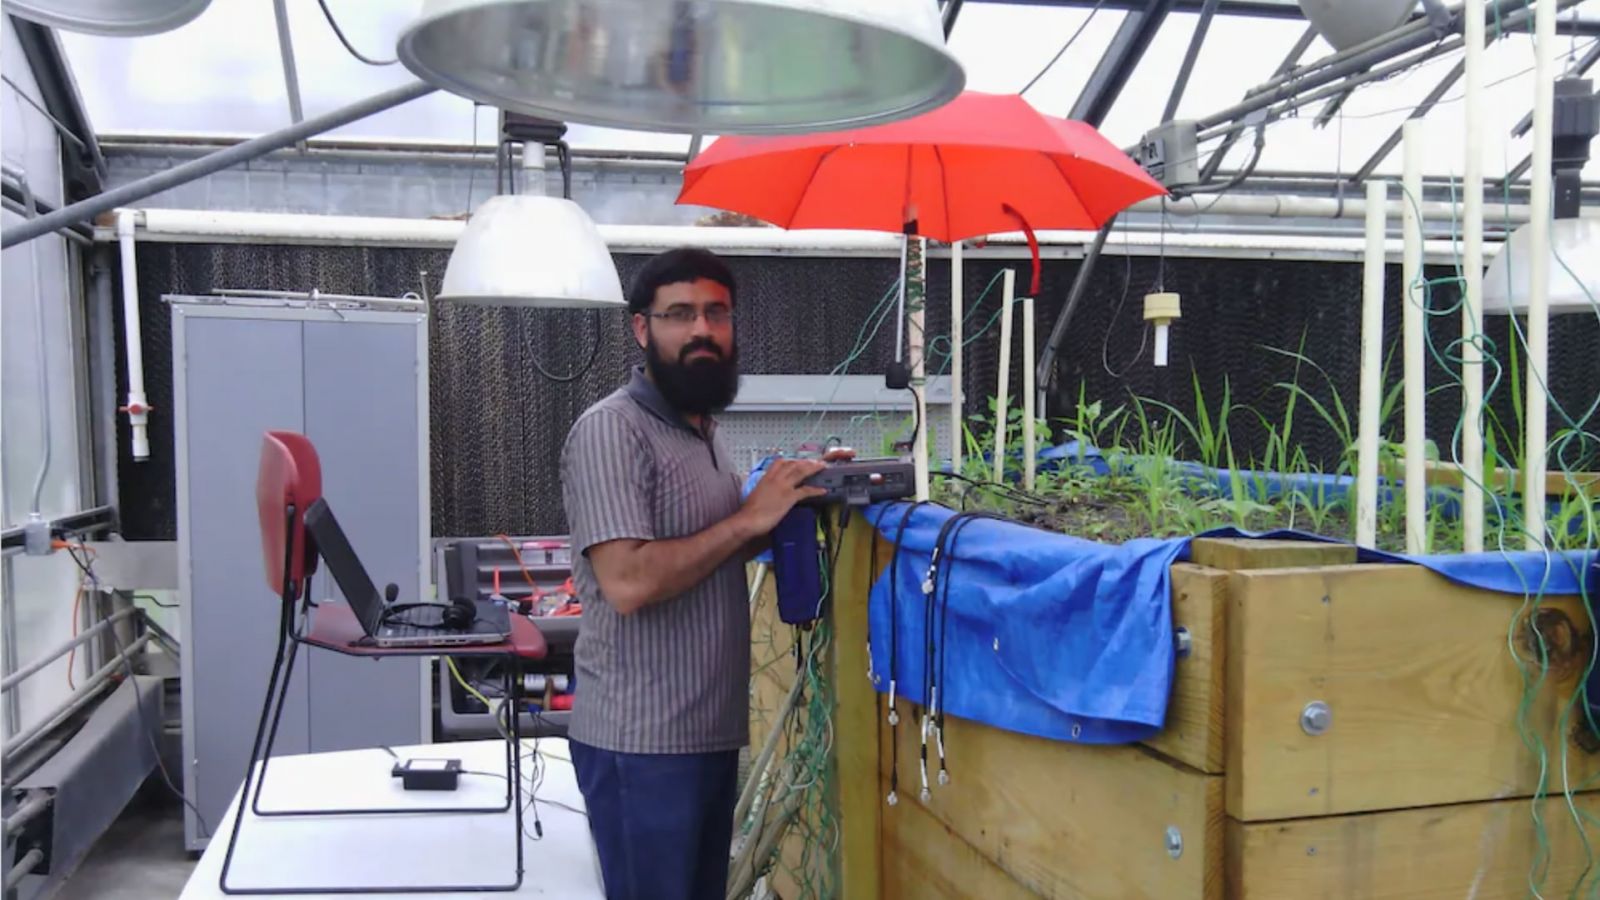 The underground antenna measurements in an indoor testbed using a Vector Network Analyzer. (Photo courtesy Abdul Salam)